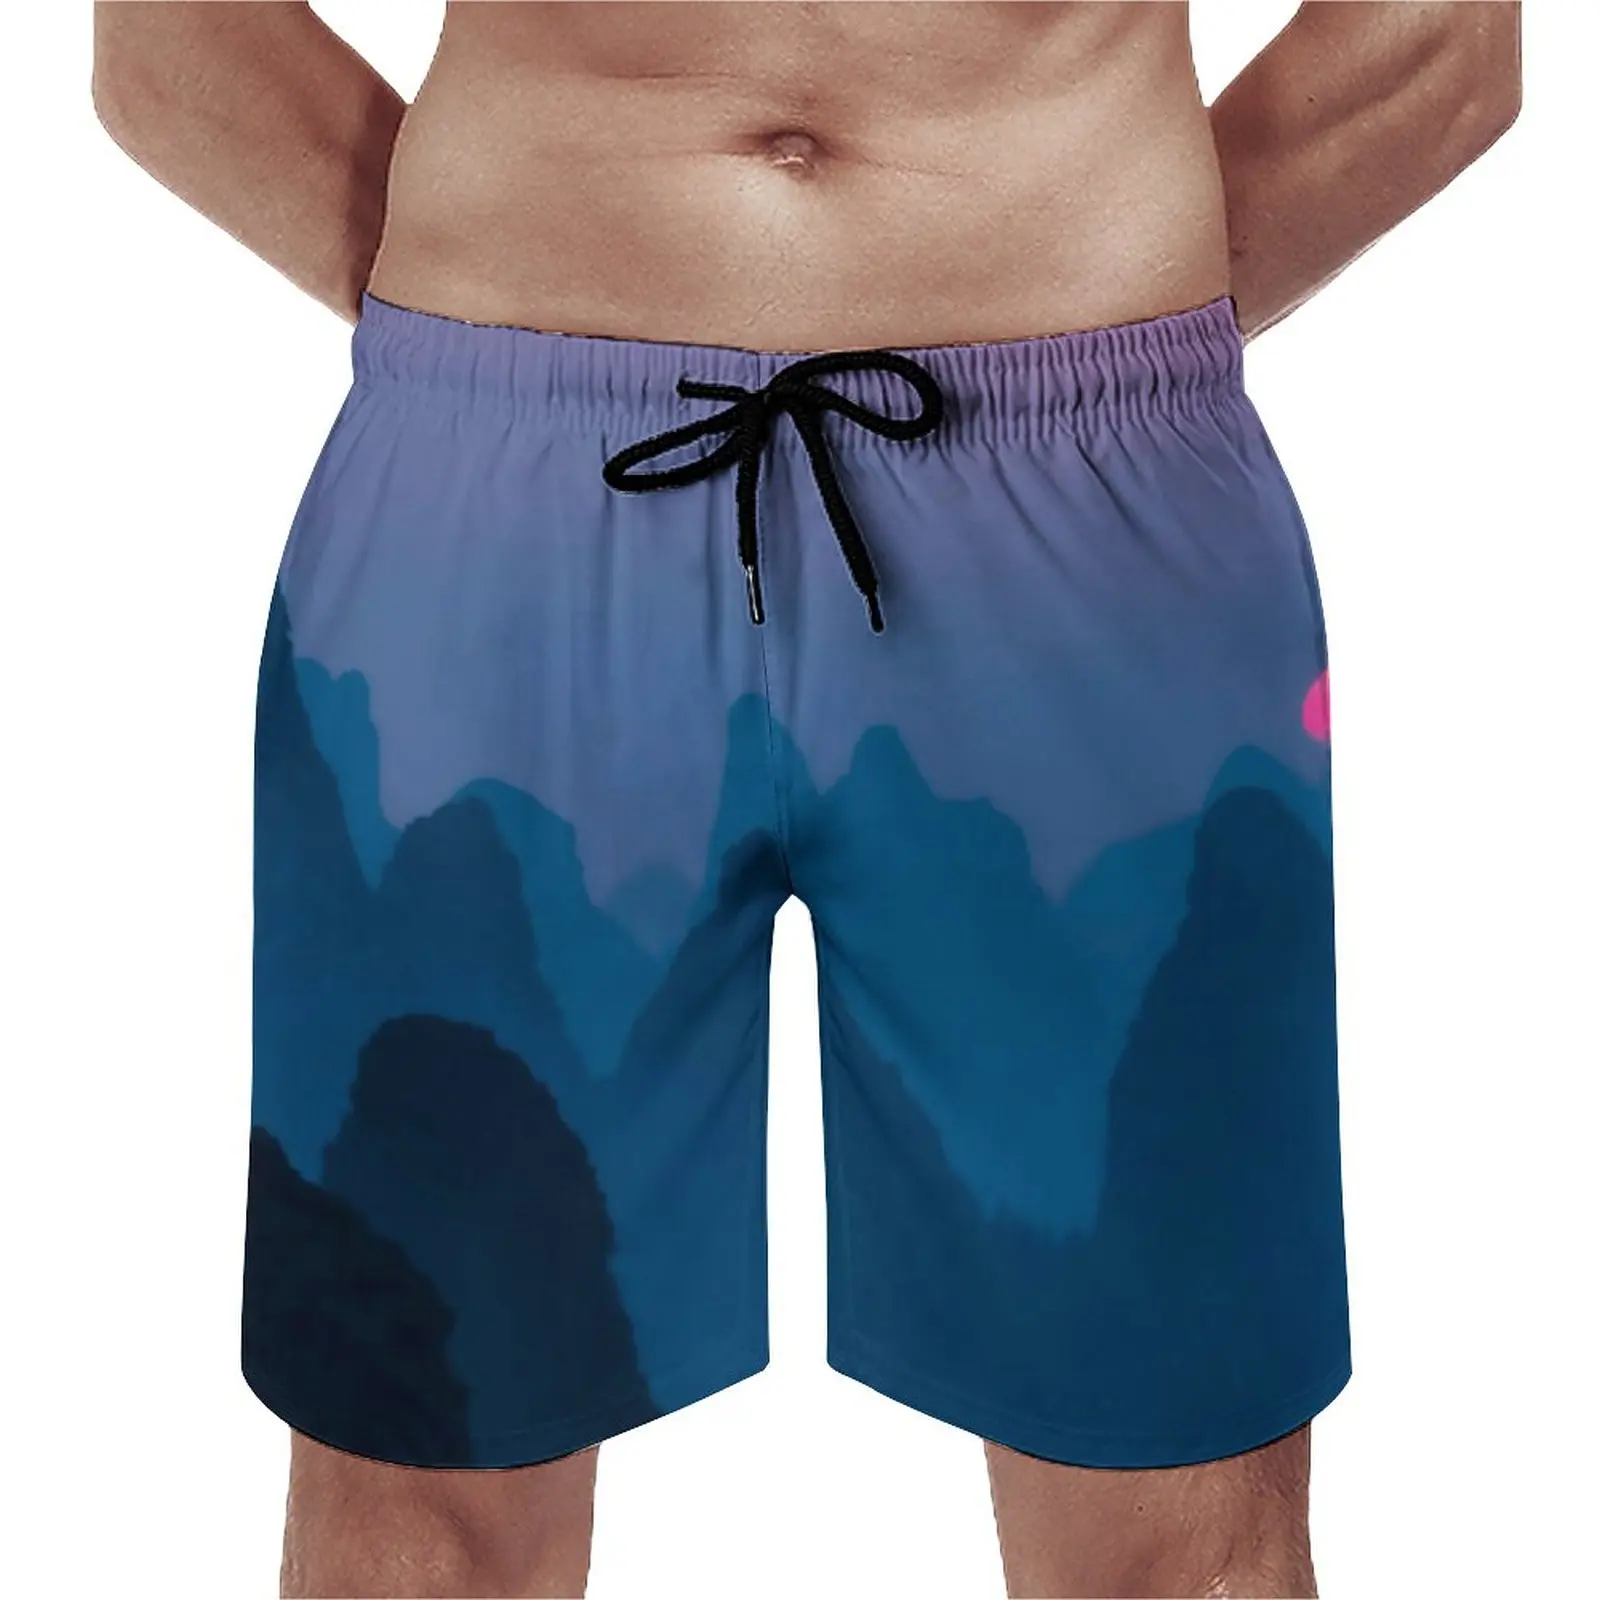 

The Mountains Art Gym Shorts Sunset Print Casual Board Short Pants Graphic Sports Fitness Fast Dry Swim Trunks Birthday Present